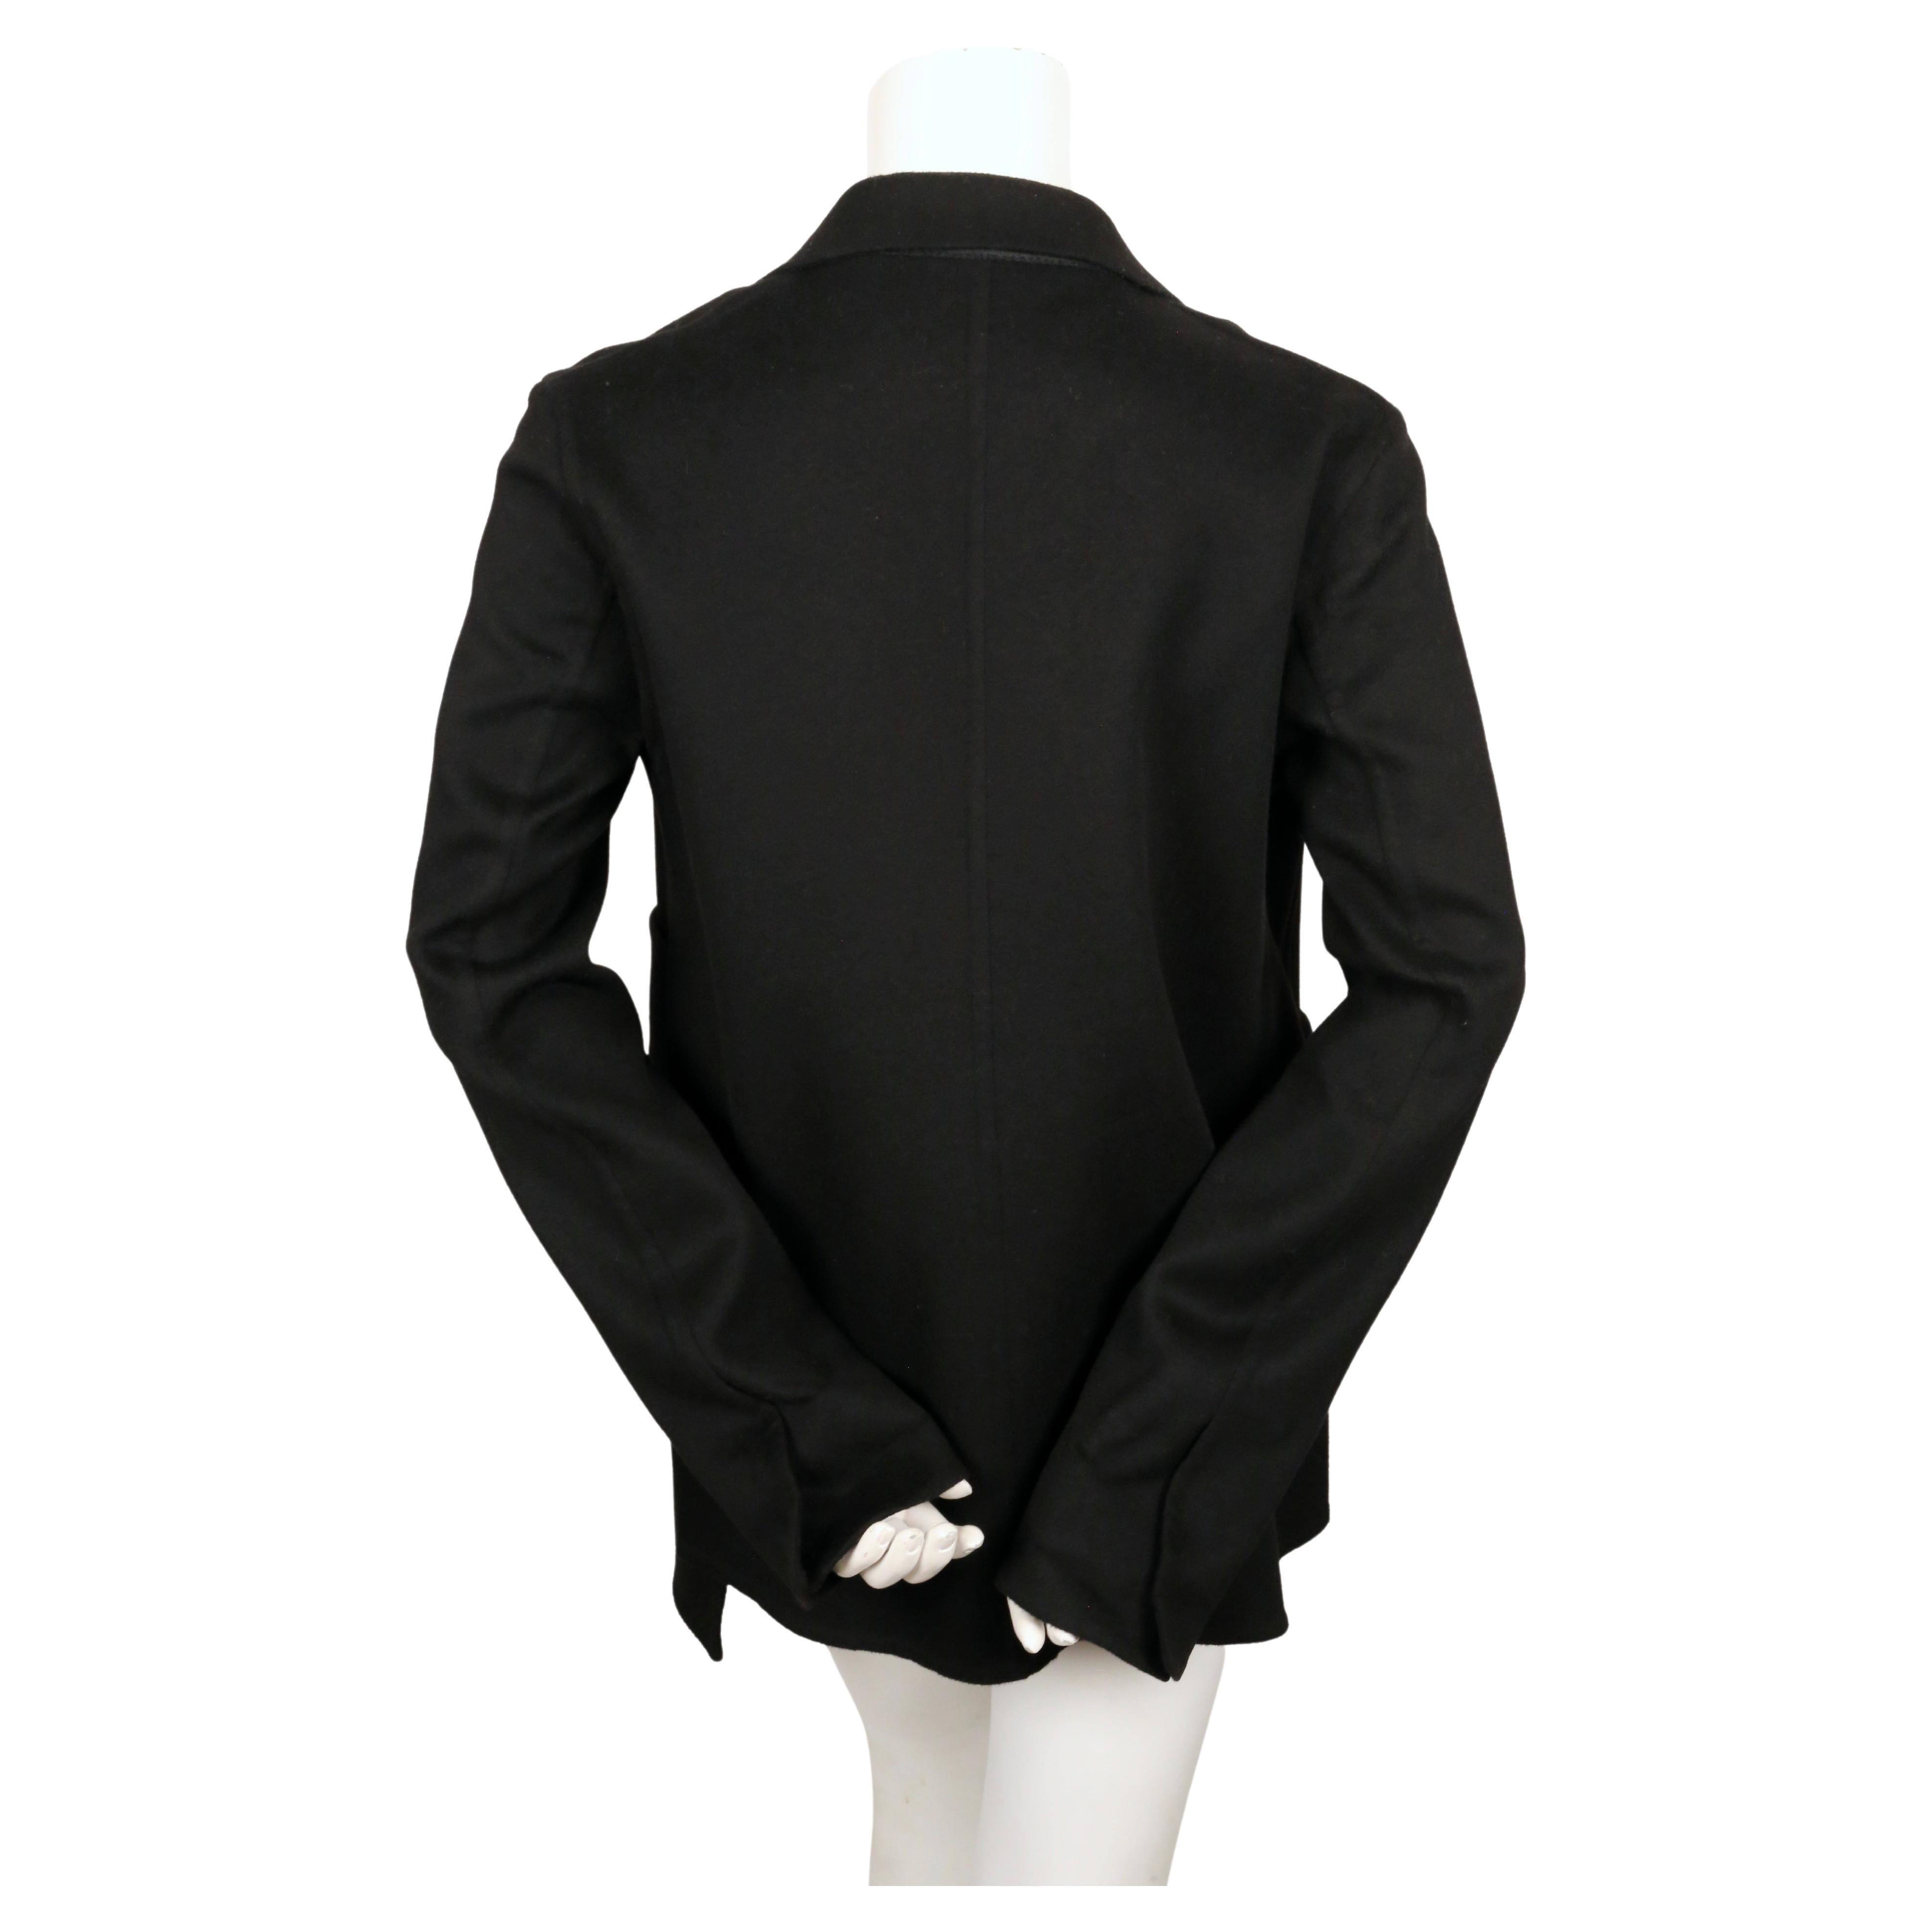 Women's or Men's CELINE by PHOEBE PHILO black wool and cashmere jacket with asymmetrical belt For Sale